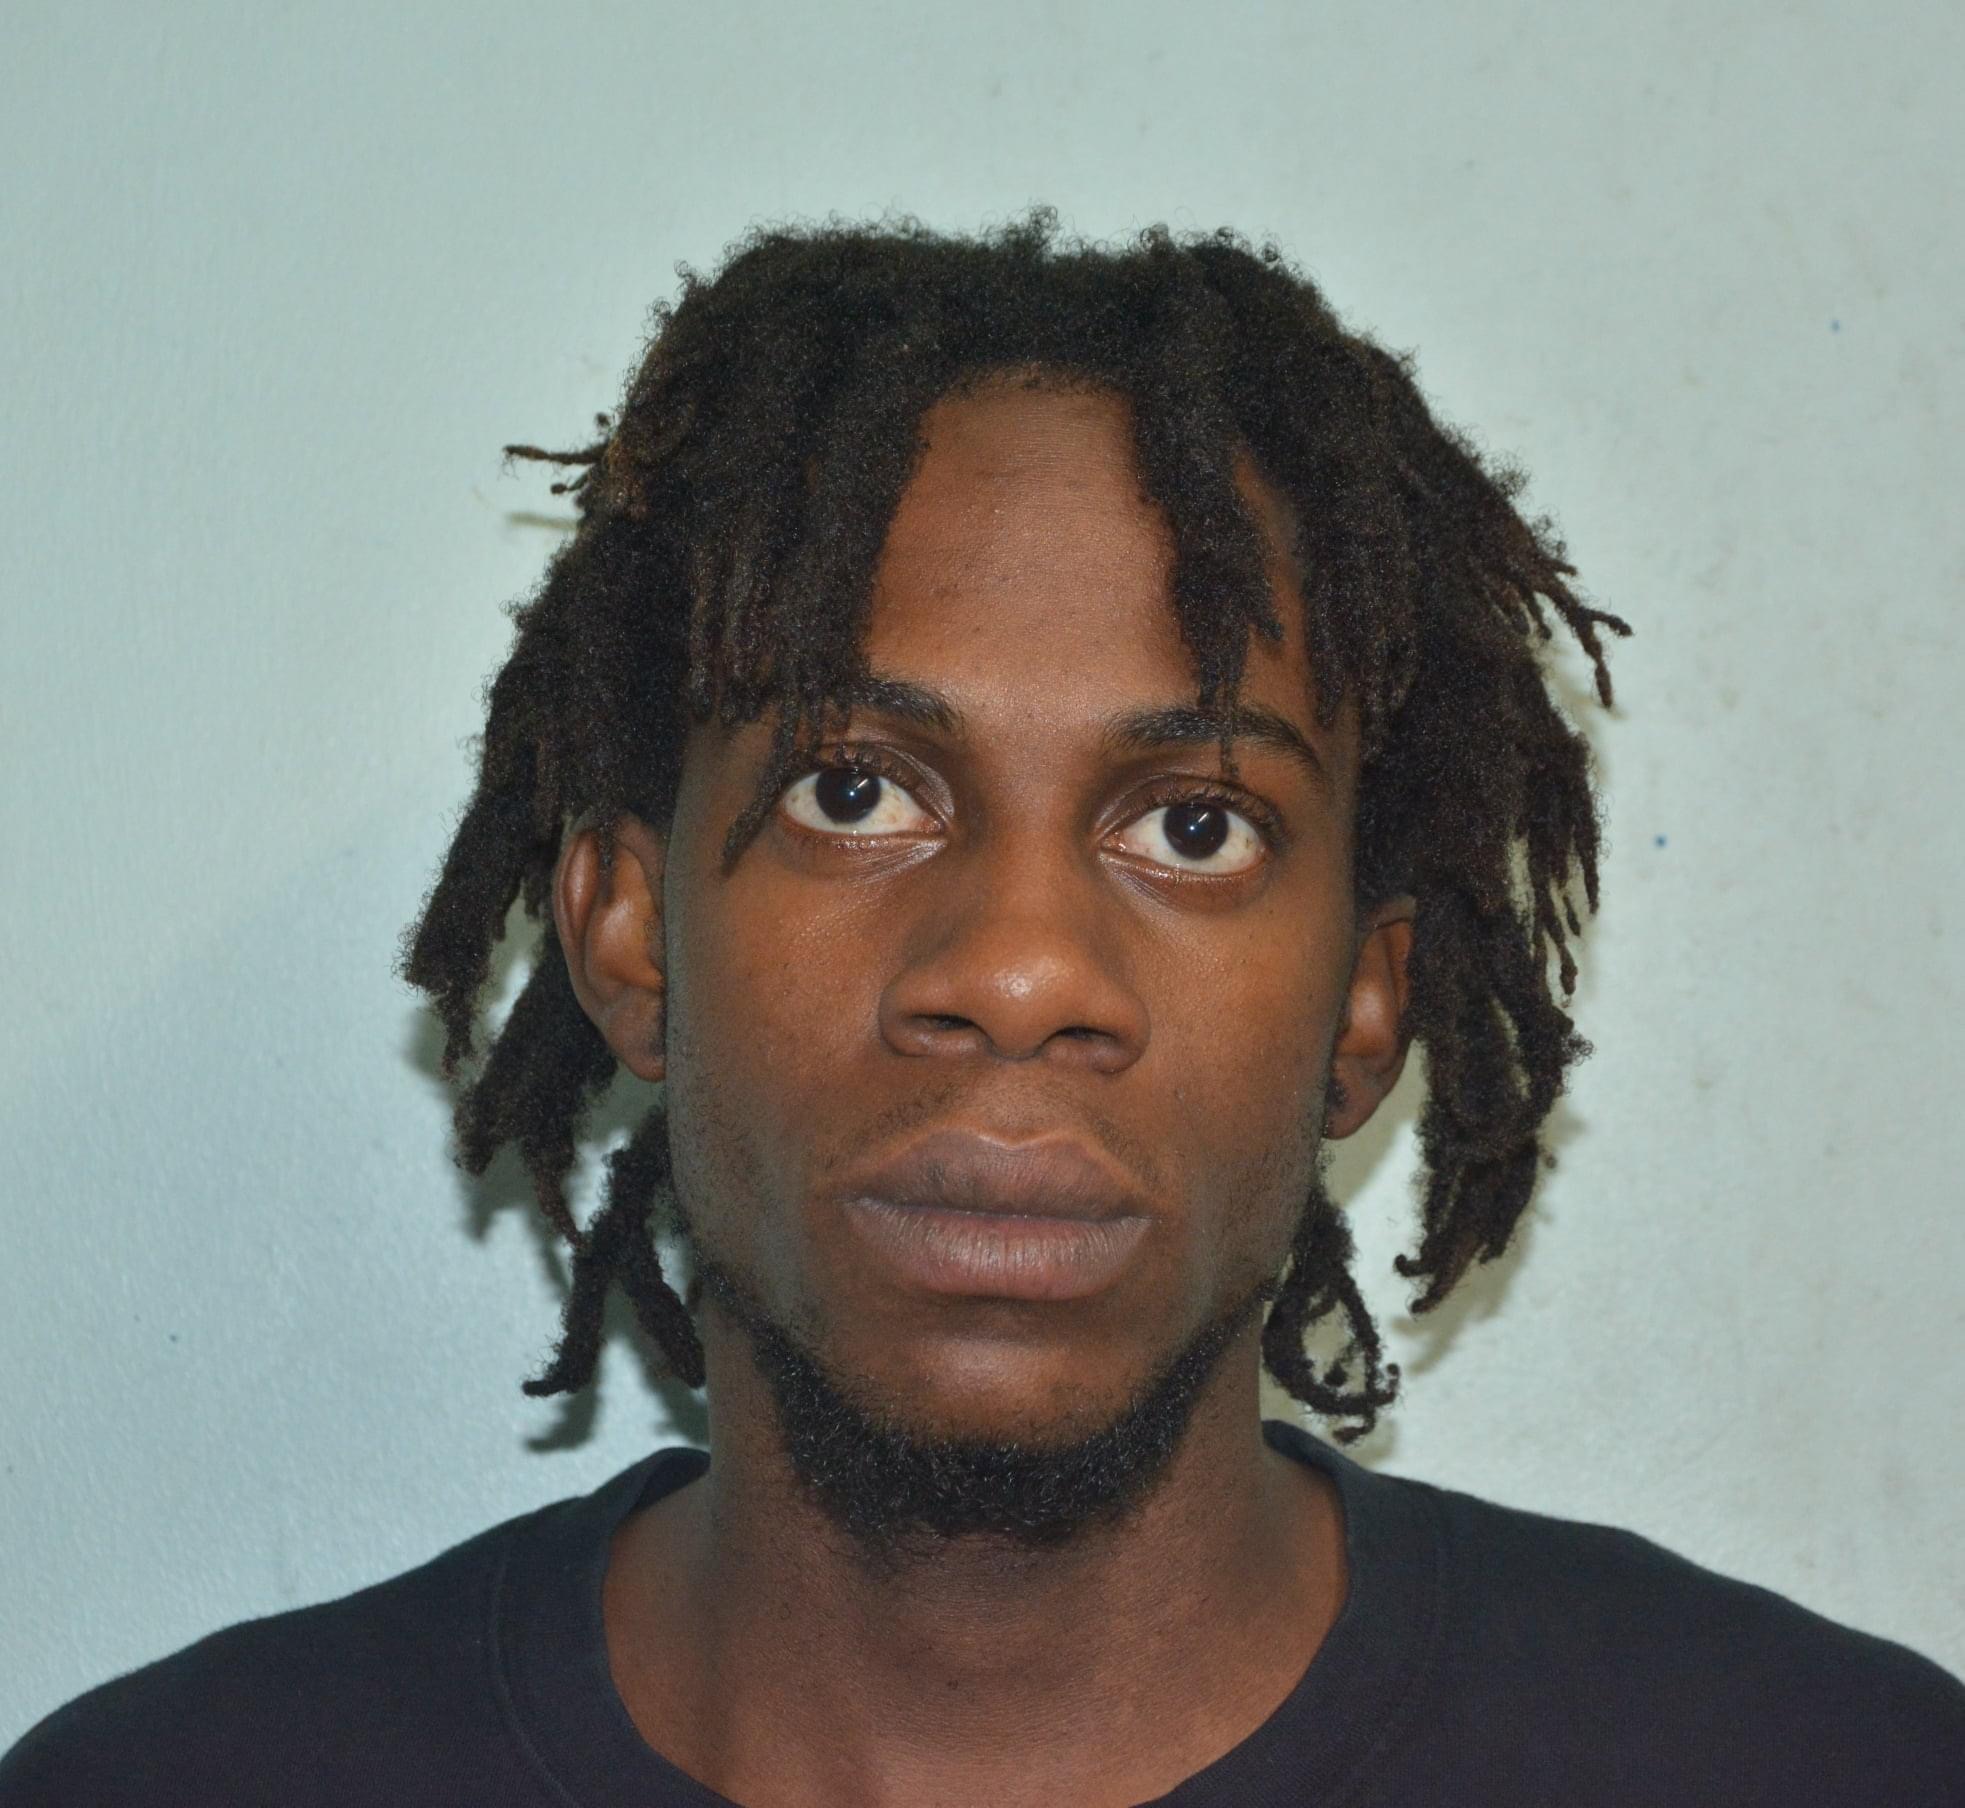 Man to appear in Court for robbery with aggravation